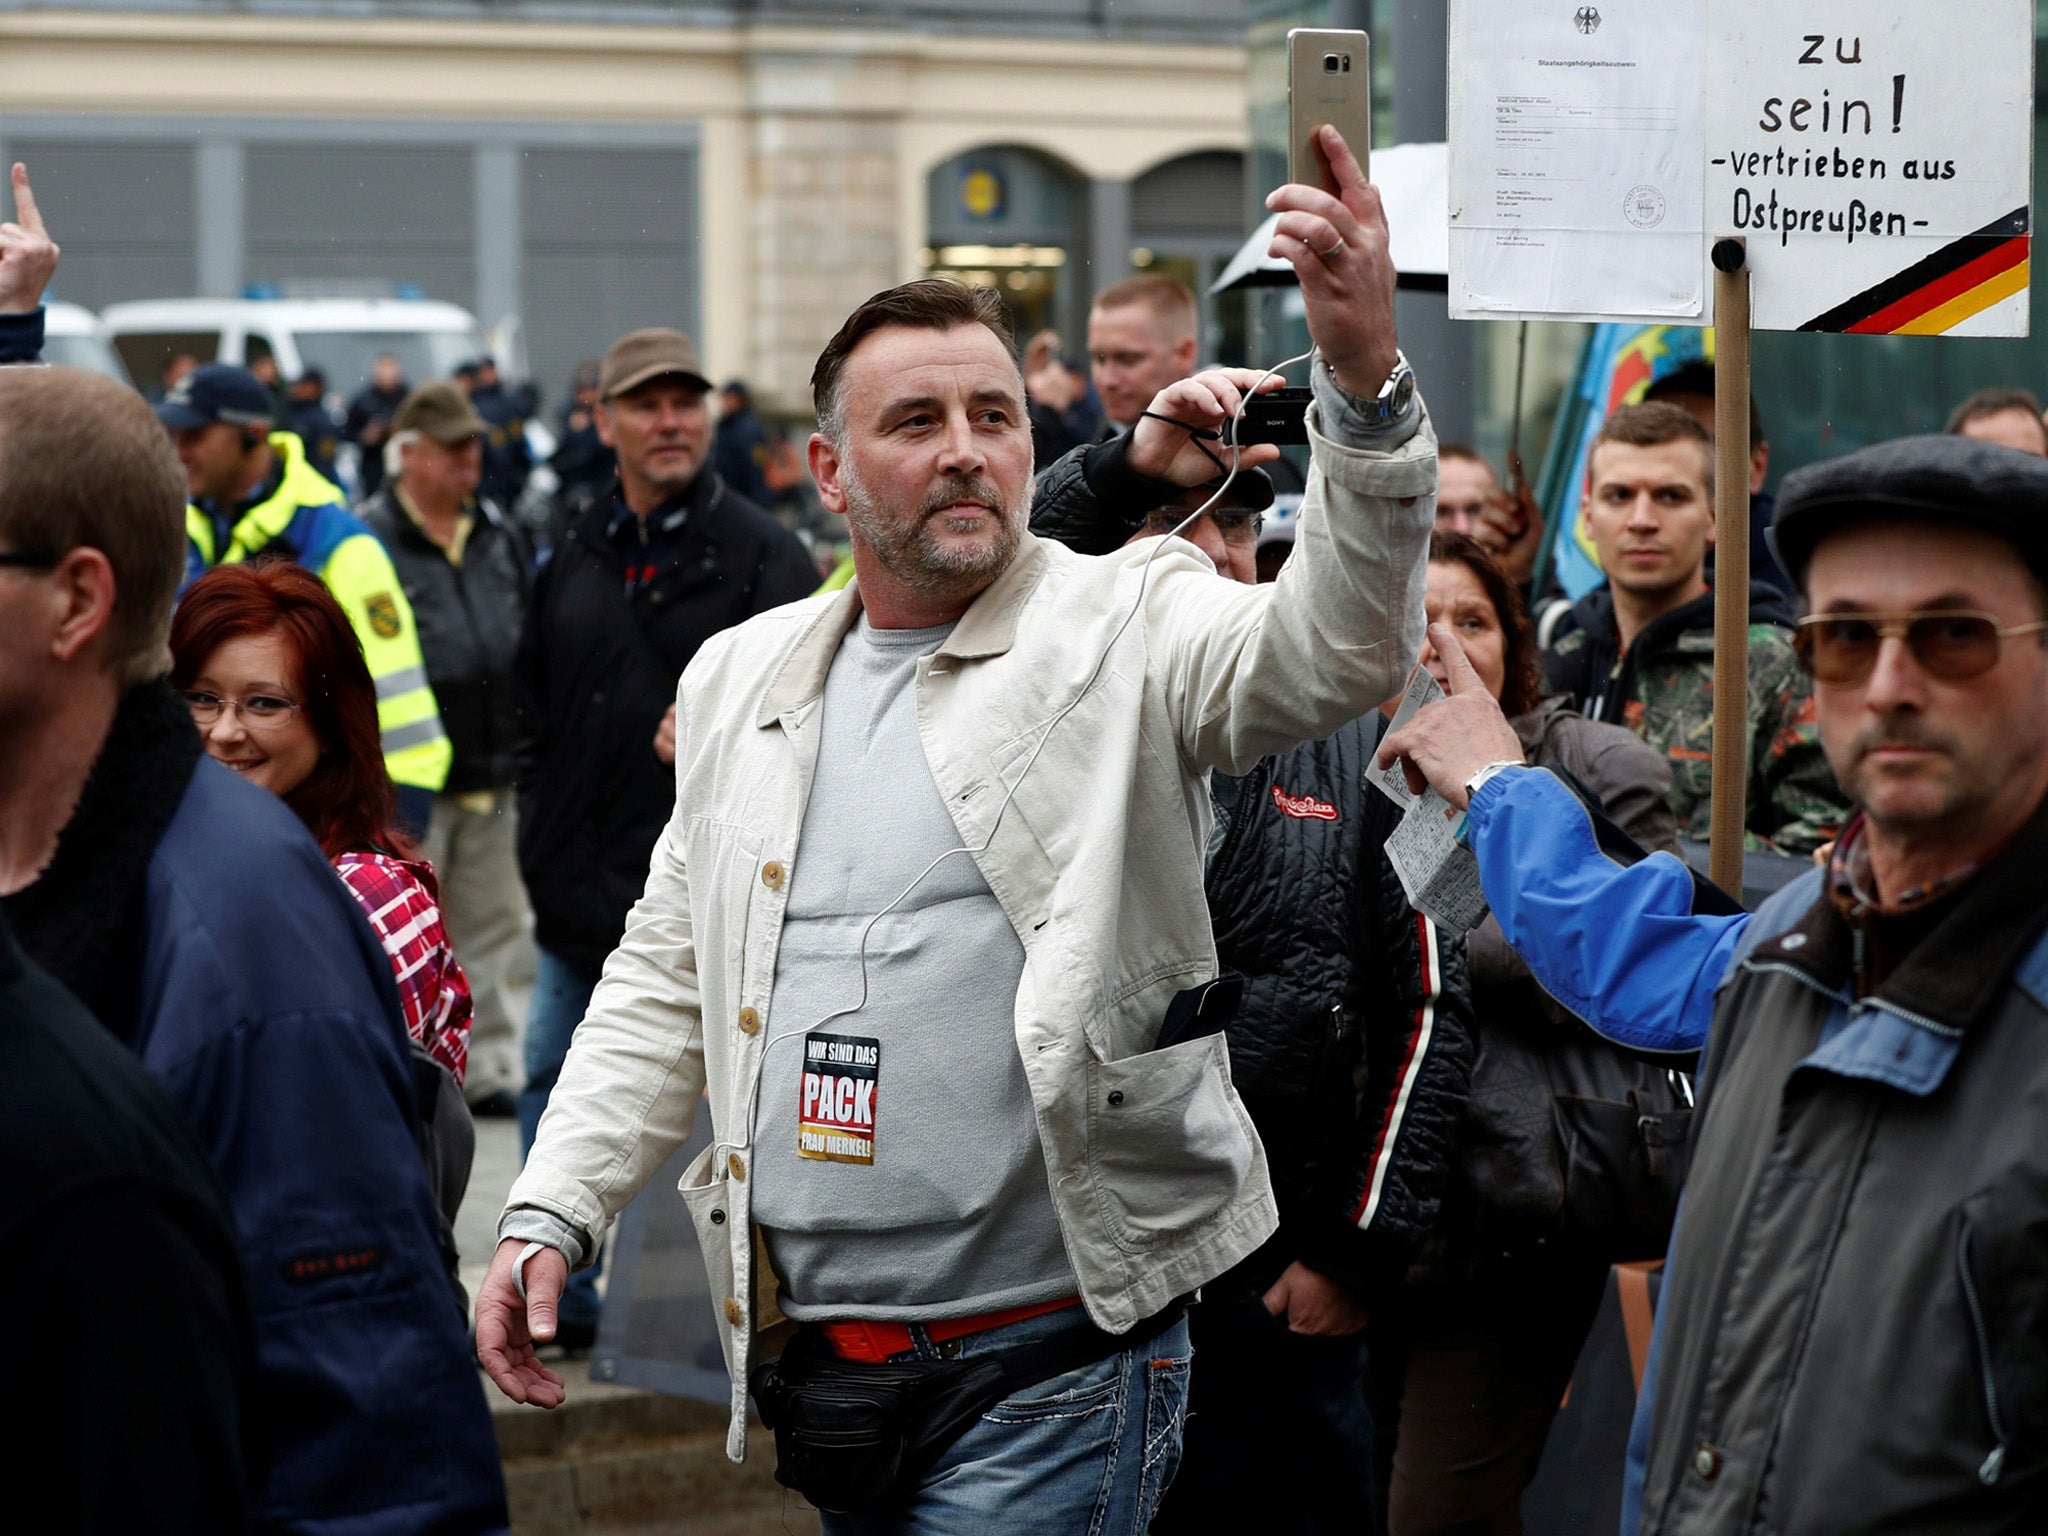 Founder of far-right anti-Islam group Pegida barred from entry to UK and deported